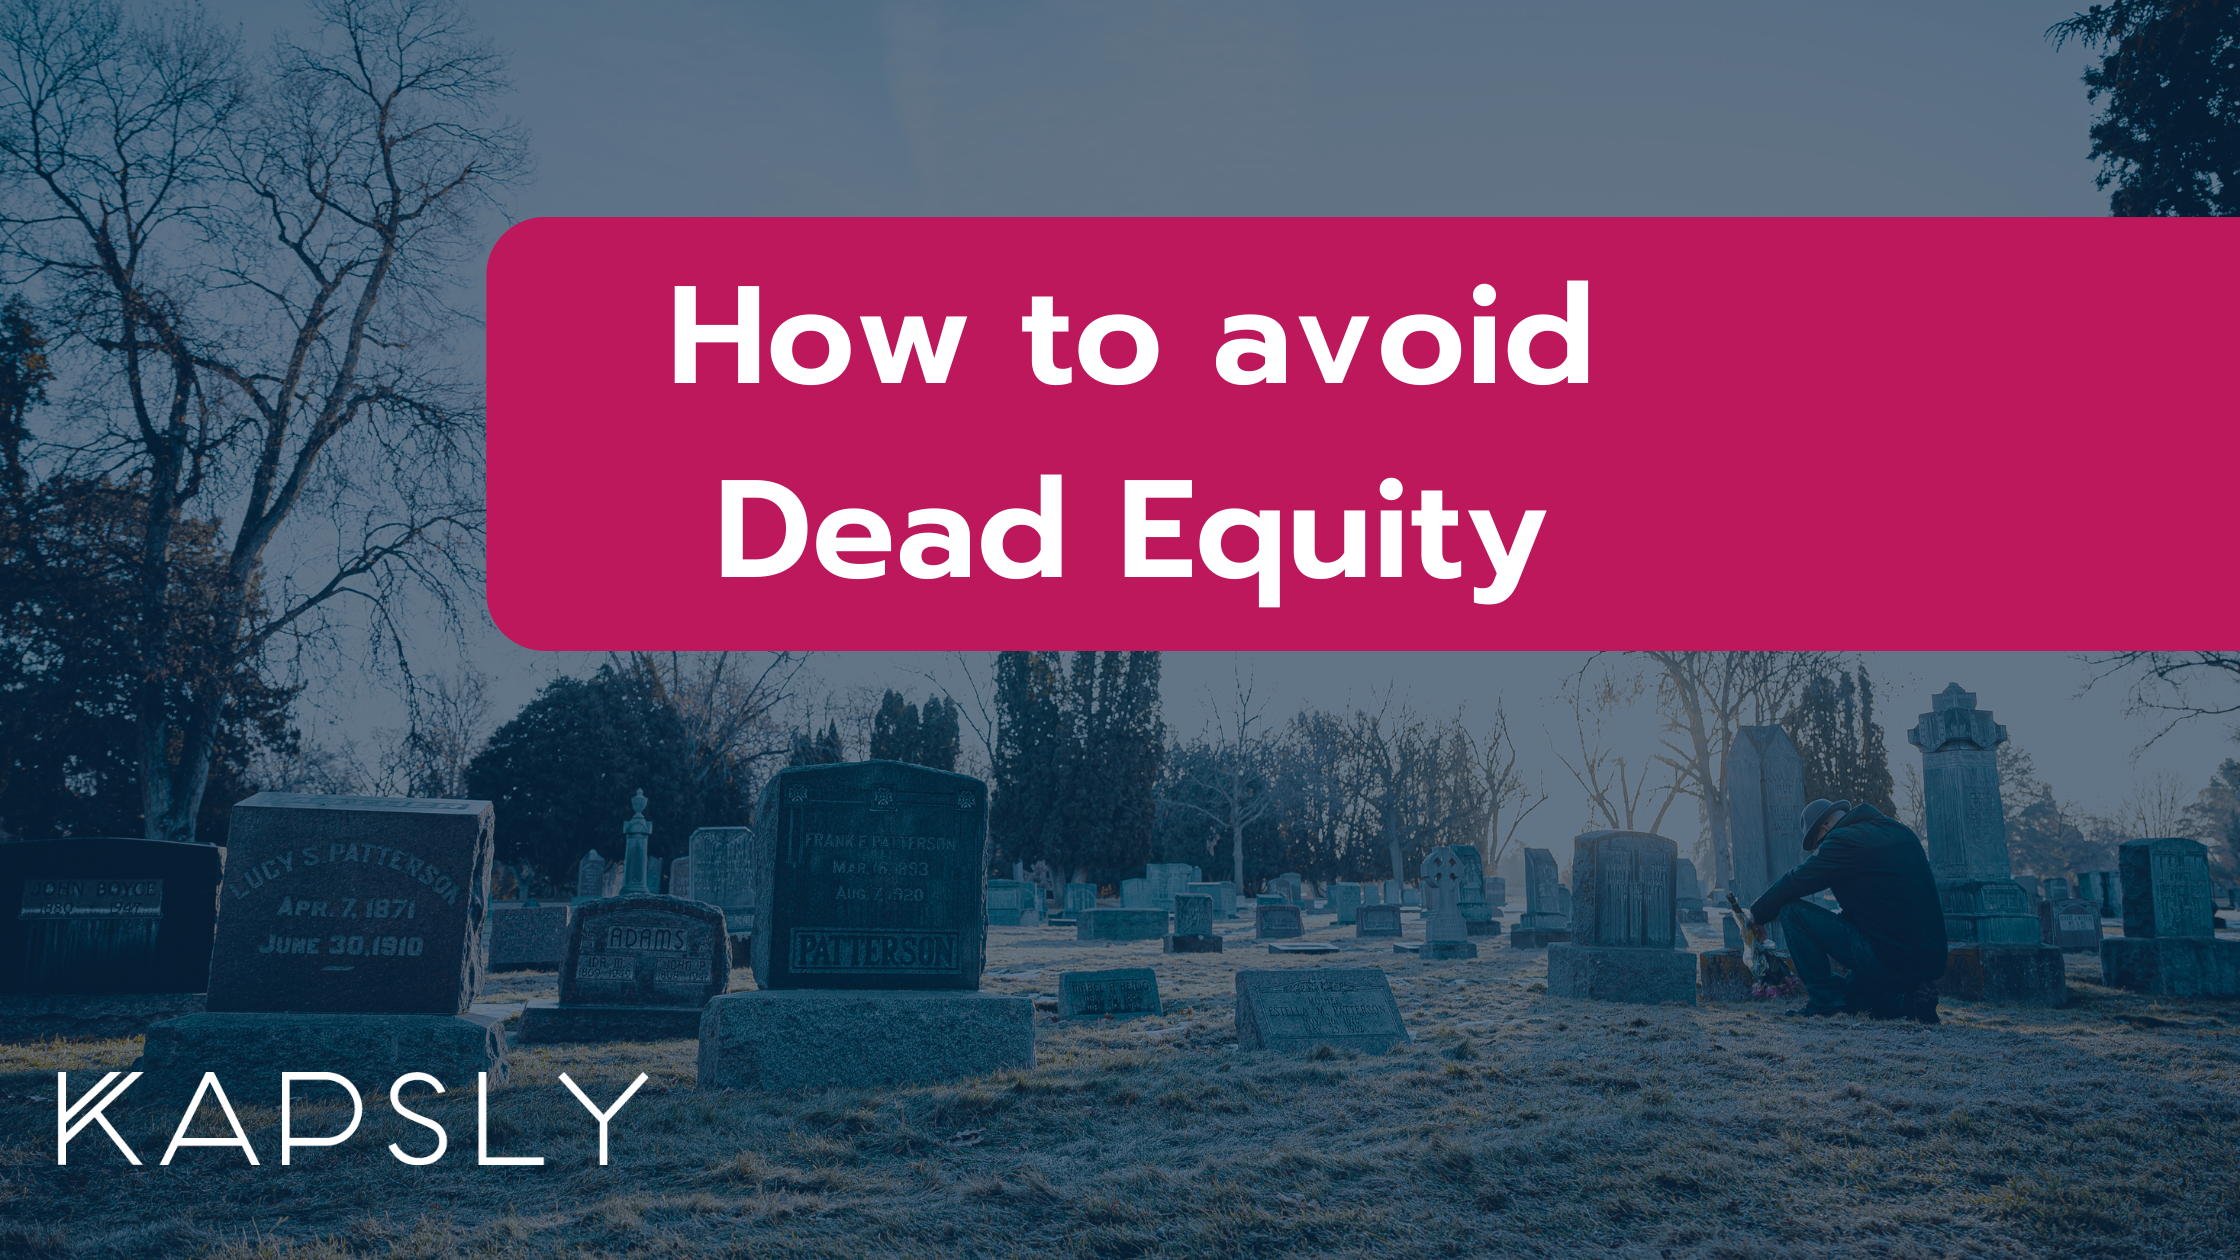 How to avoid dead equity